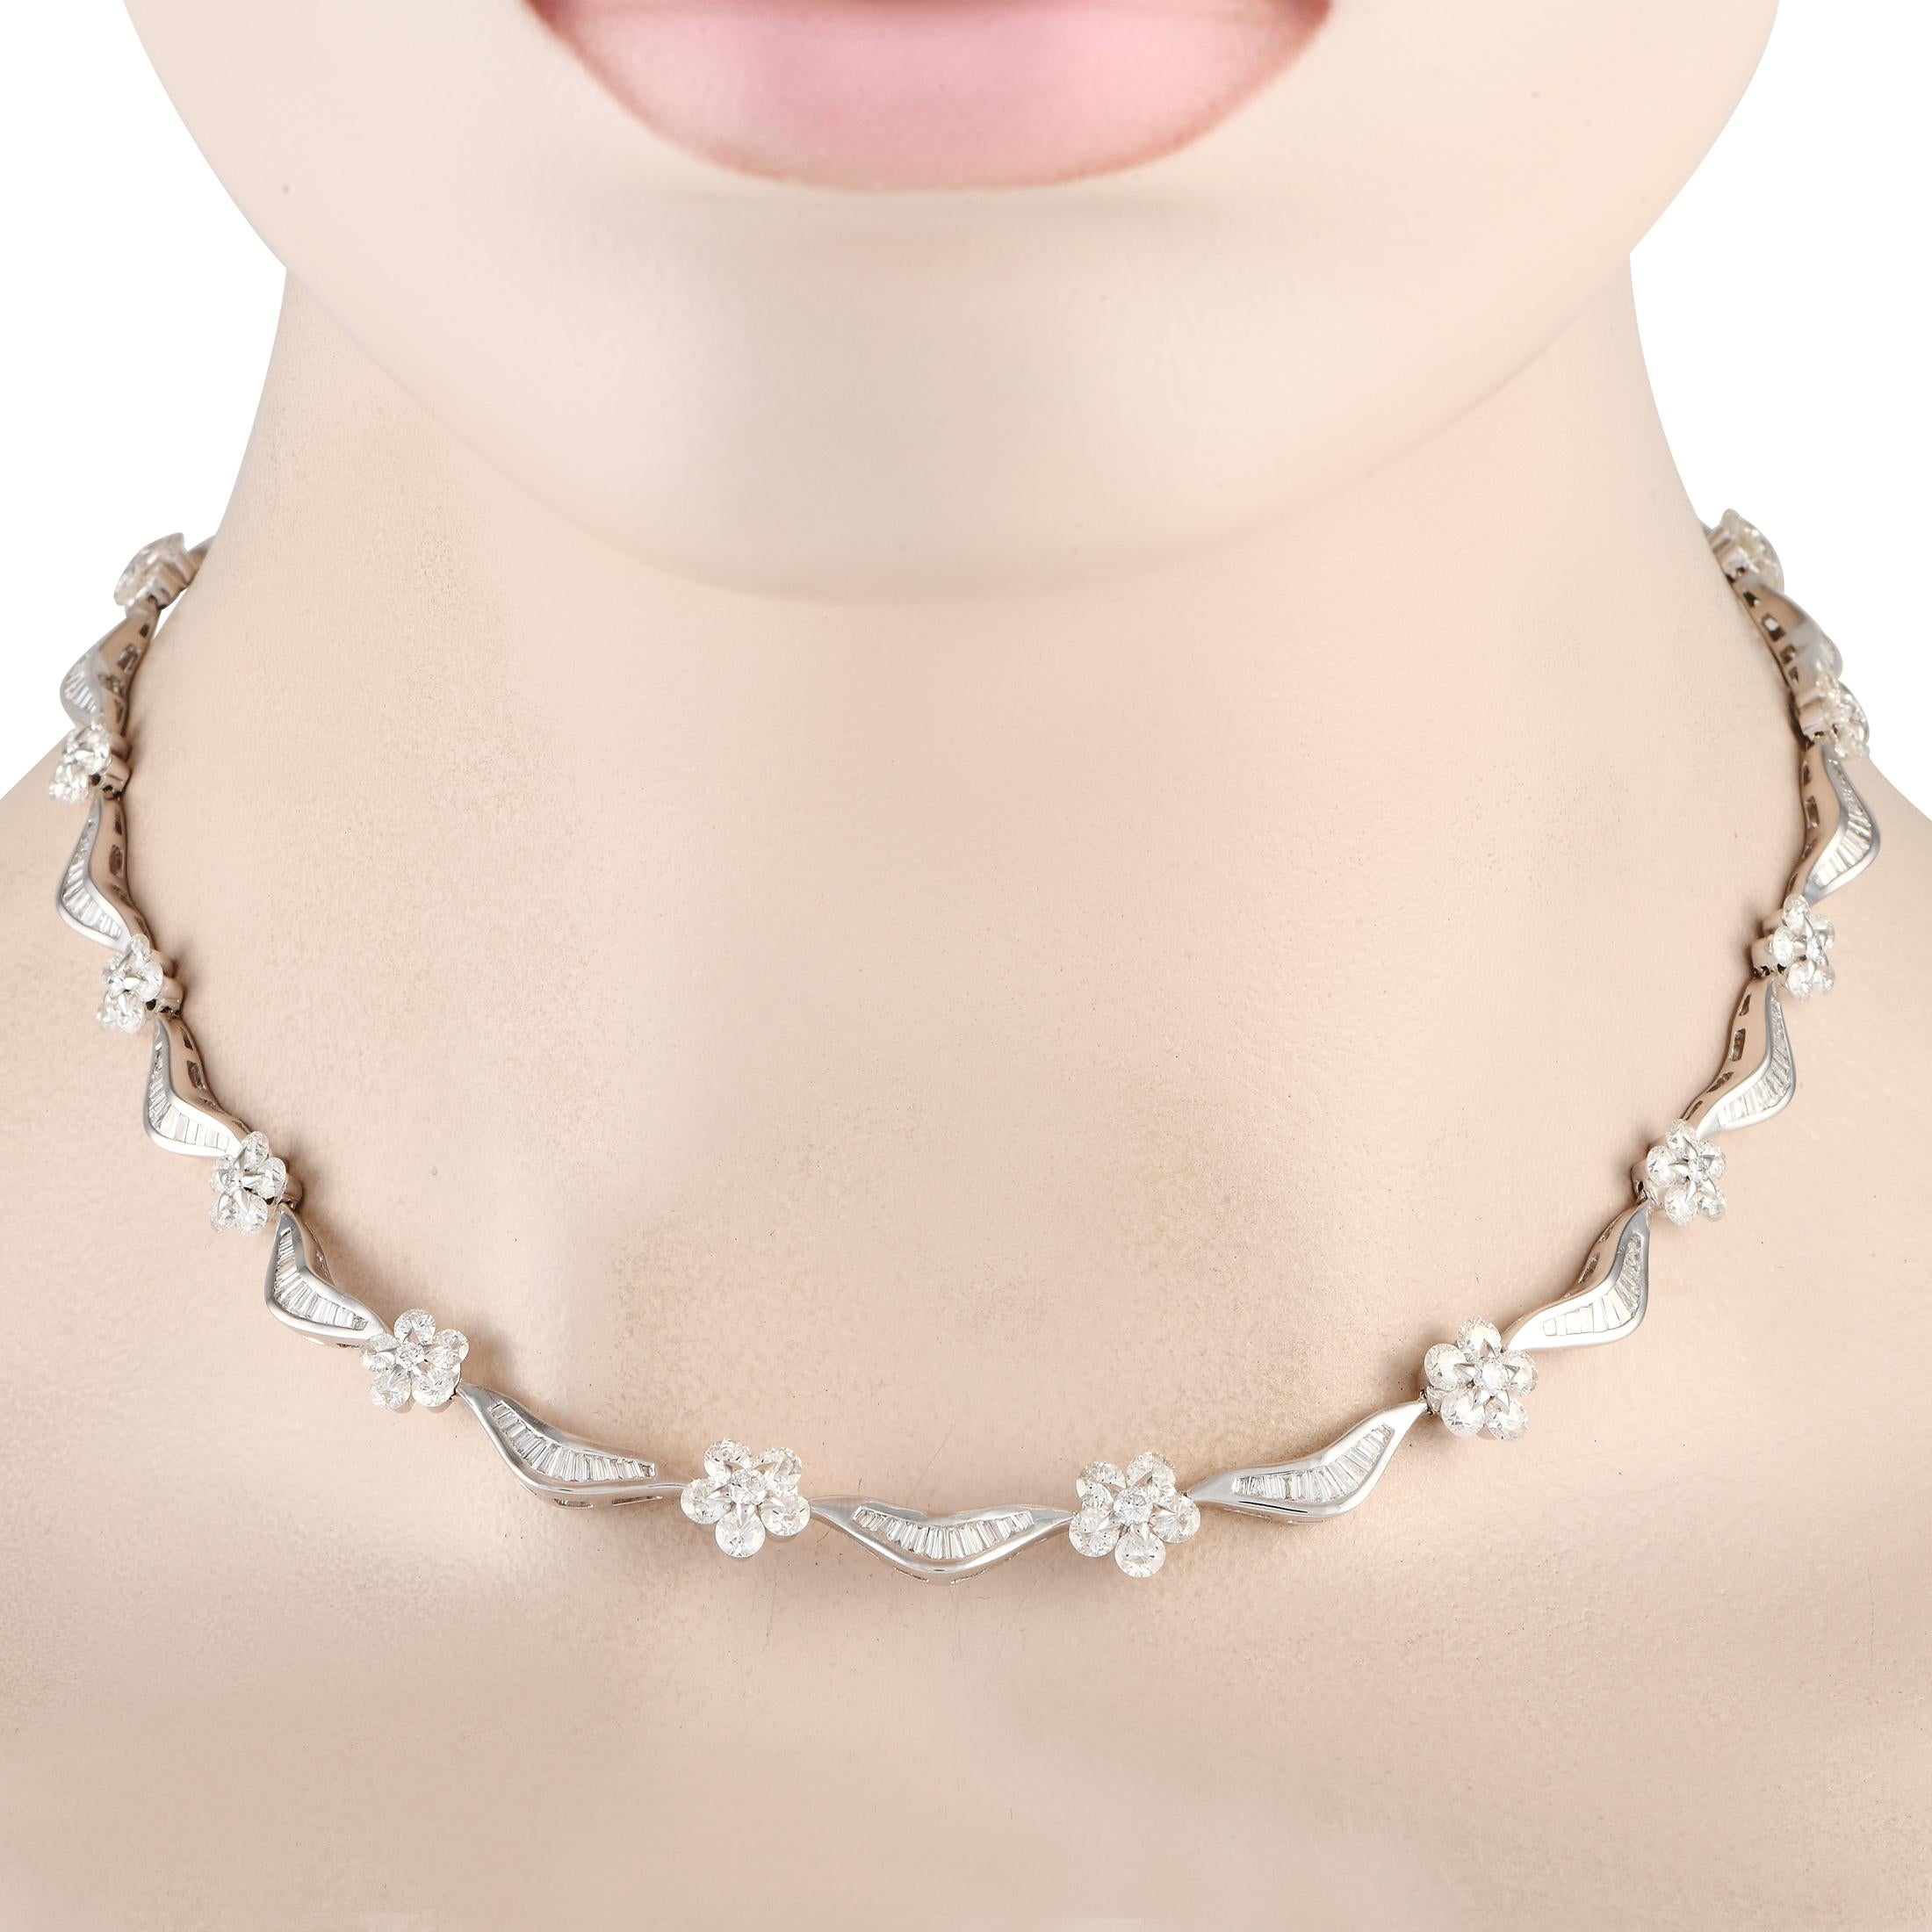 A breathtaking array of diamonds with a total weight of 18.80 carats make this luxury necklace incredibly captivating. Along with an impressive array of sparkling gemstones, this necklace features an intricate 18K white gold setting measuring 15.5